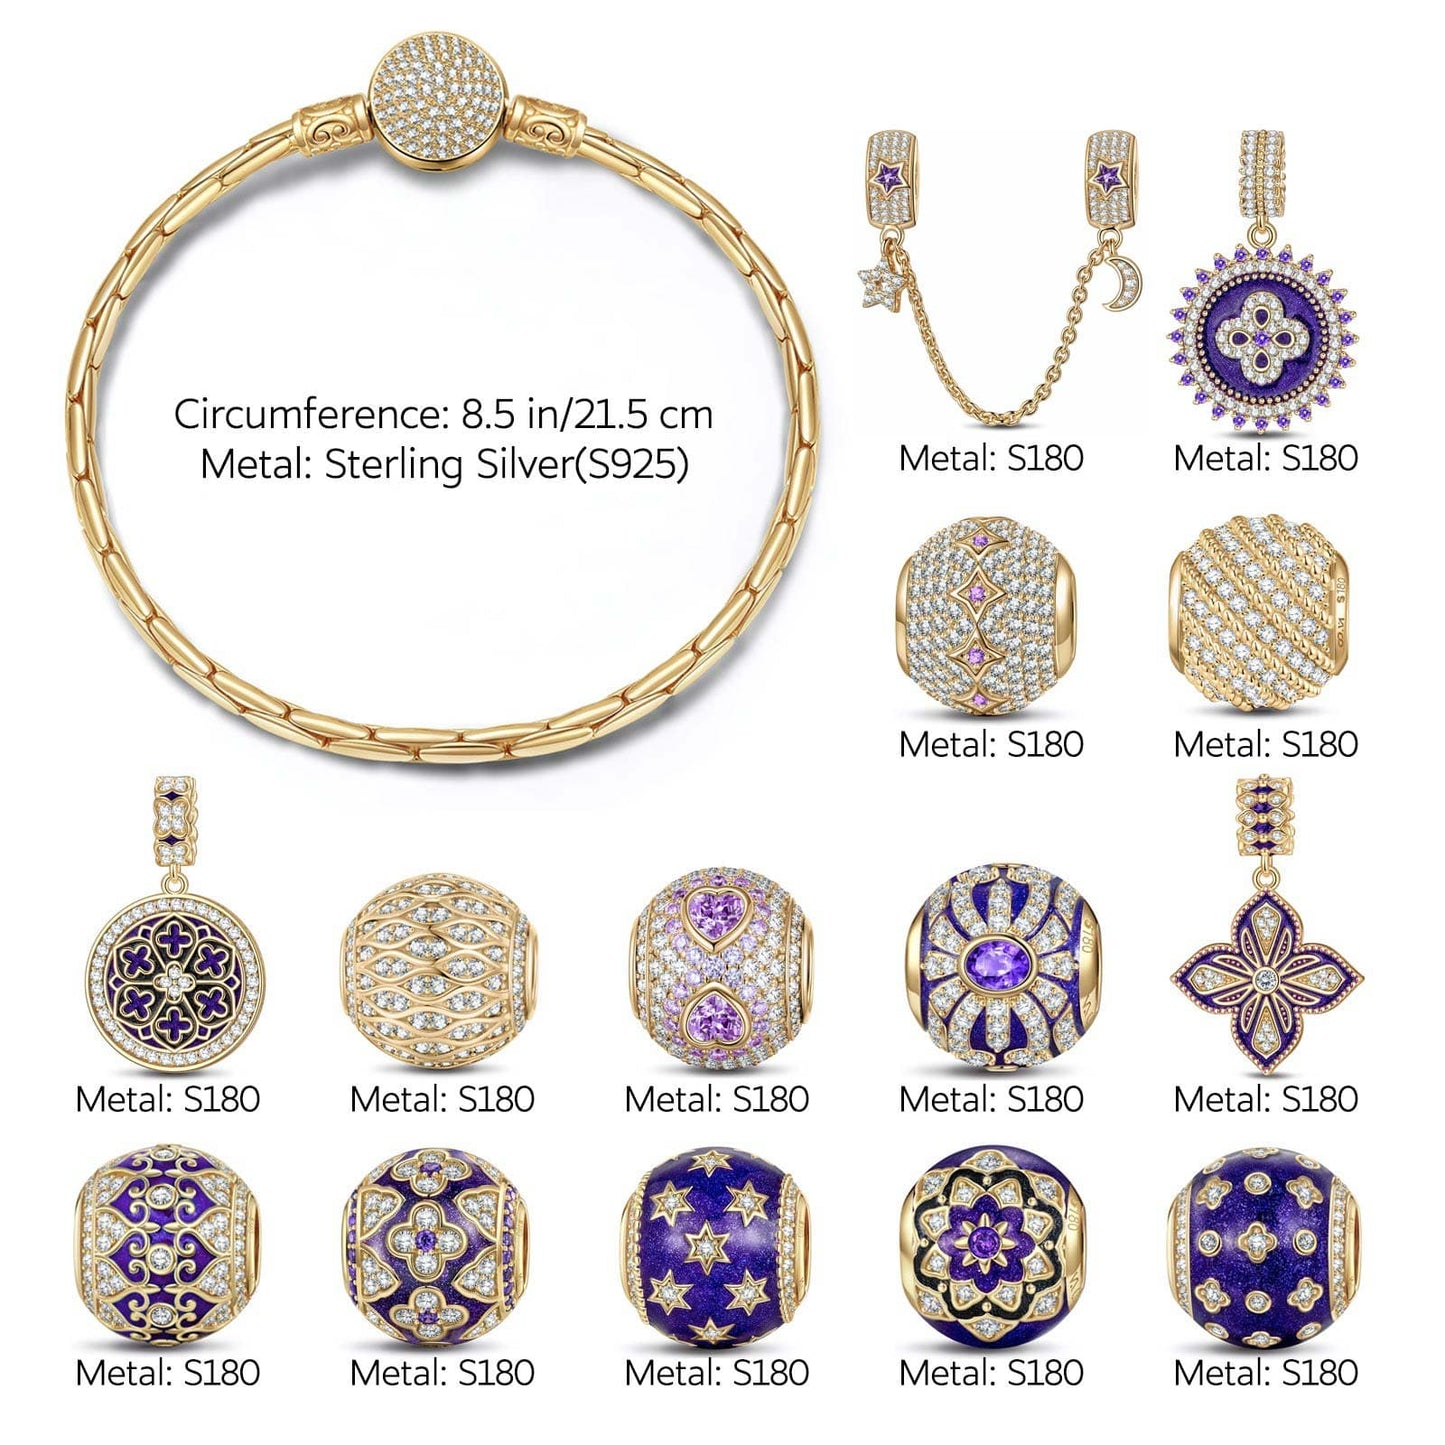 Sterling Silver Violet Dreamland Charms Bracelet Set With Enamel In 14K Gold Plated - Exclusive Christmas Gift Box